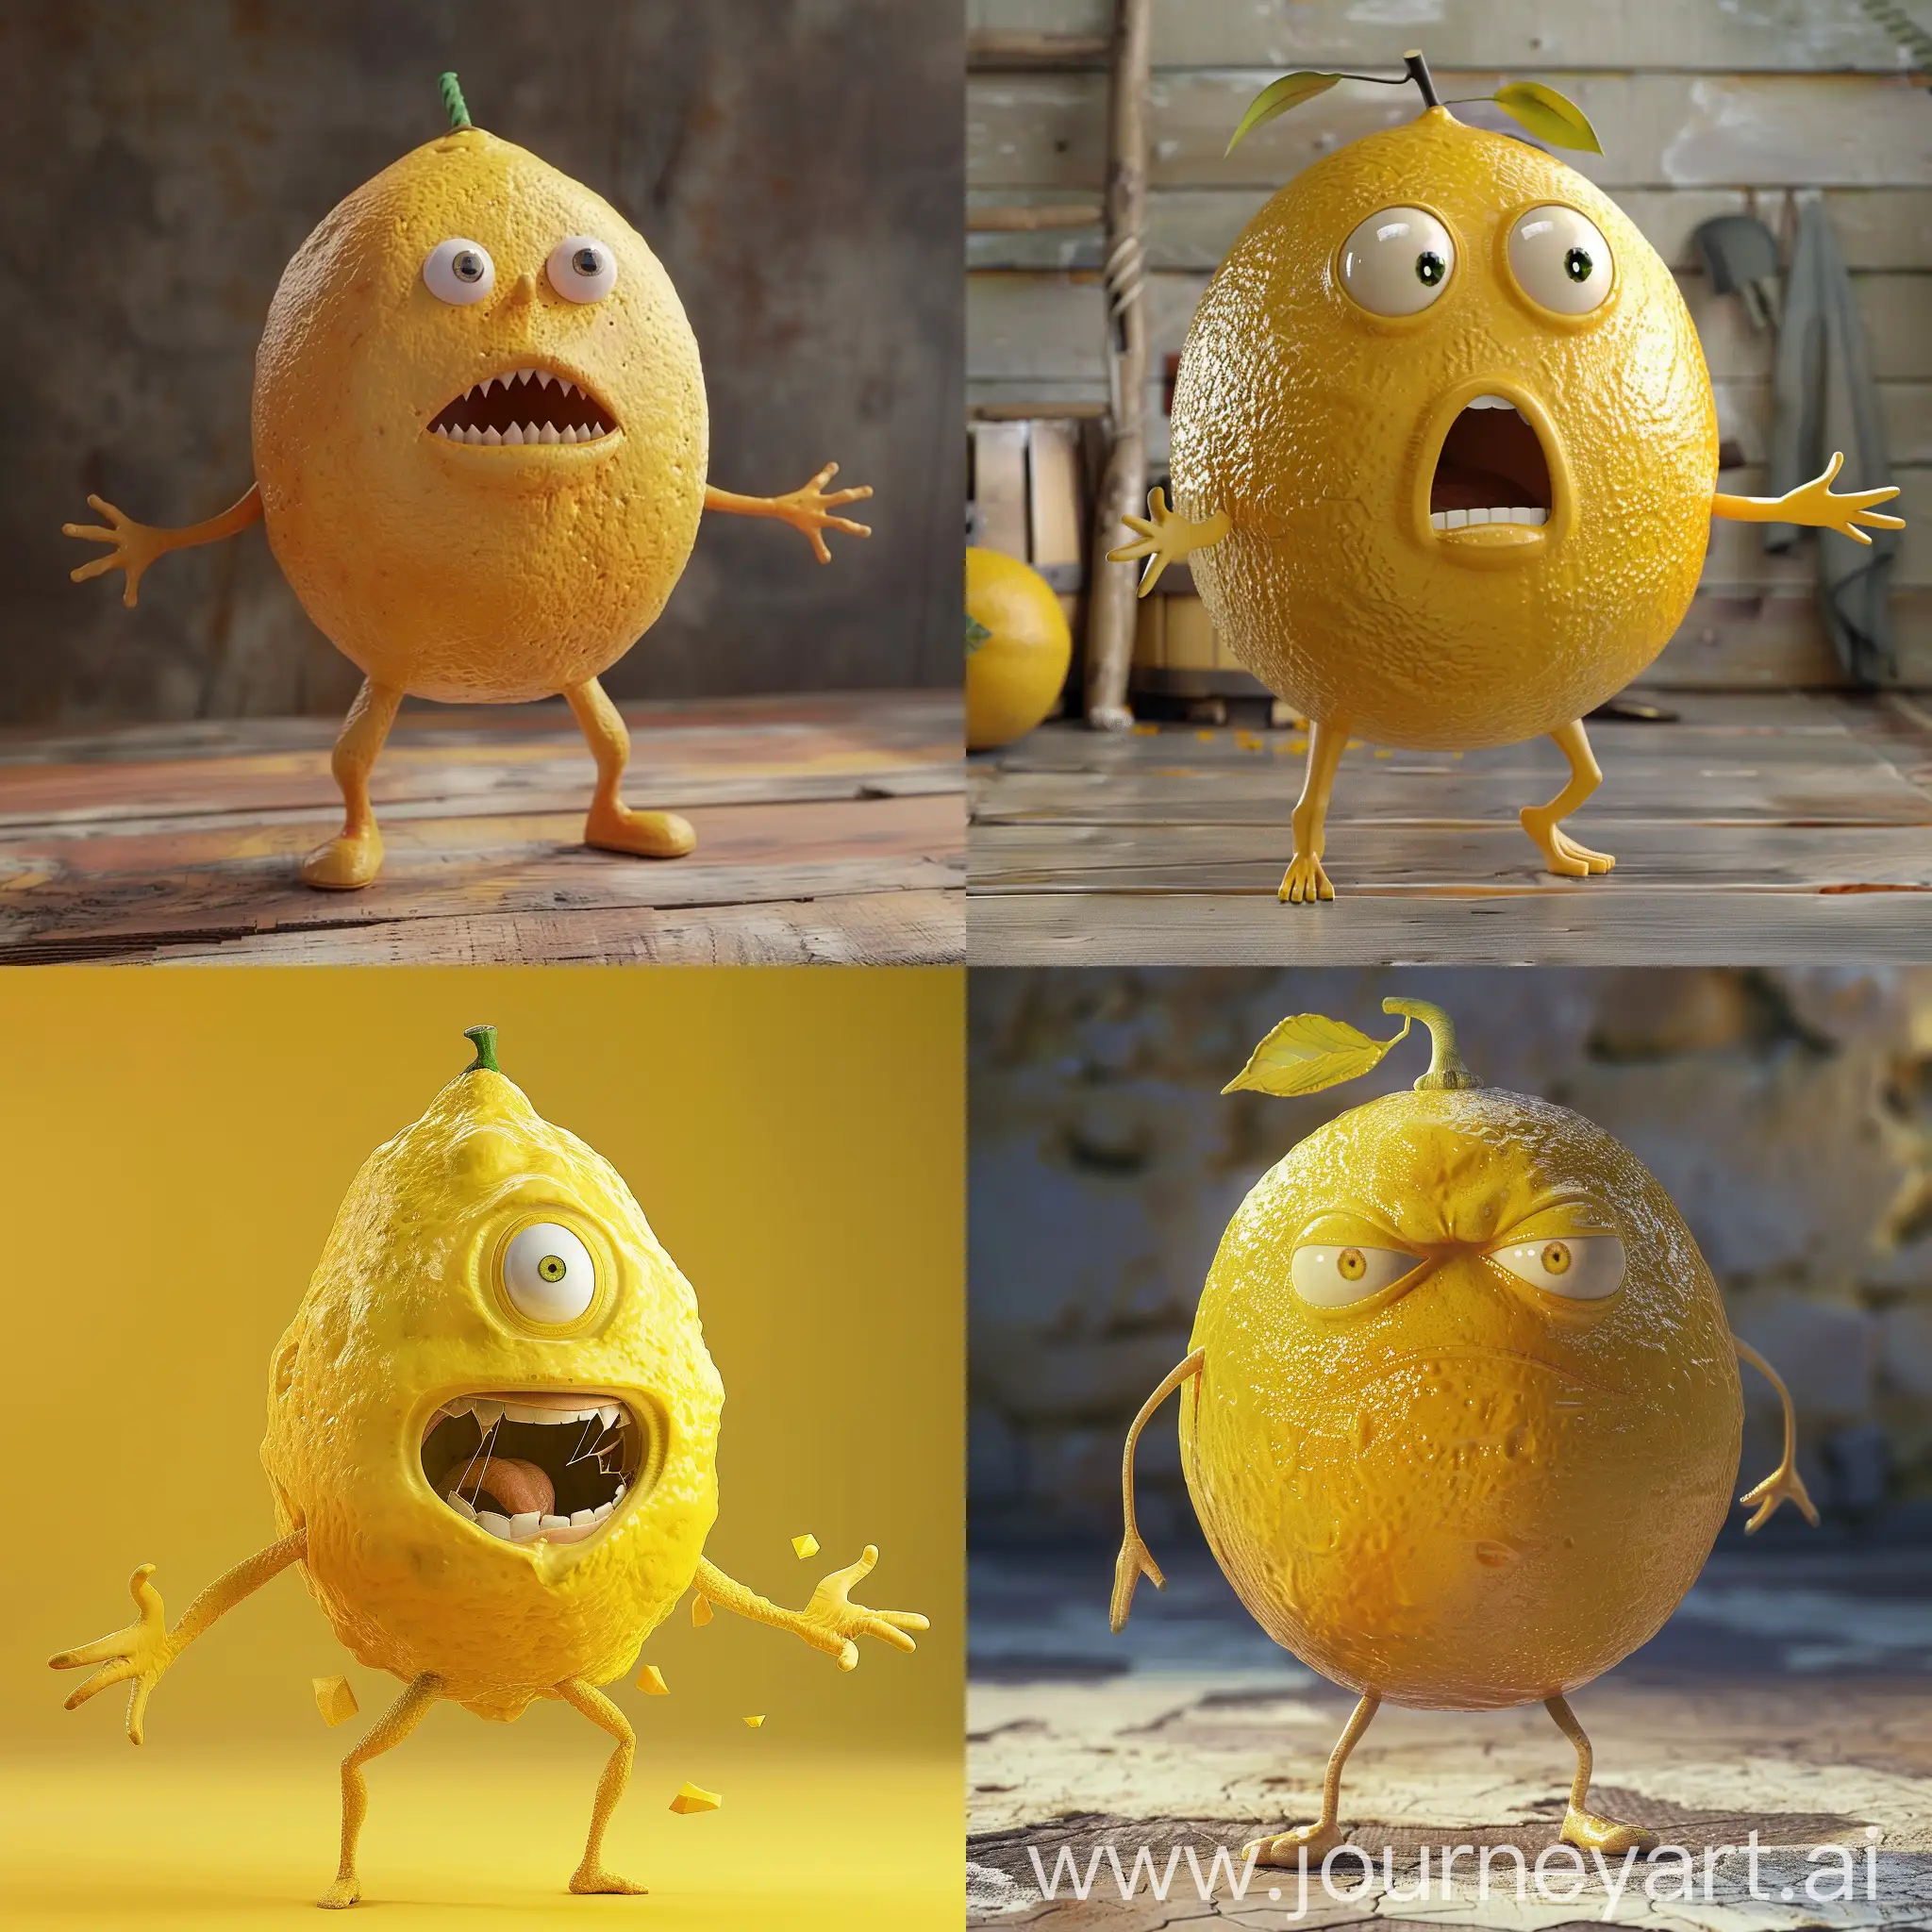 The talking lemon with arms and legs squealed really hard :: 3D animation